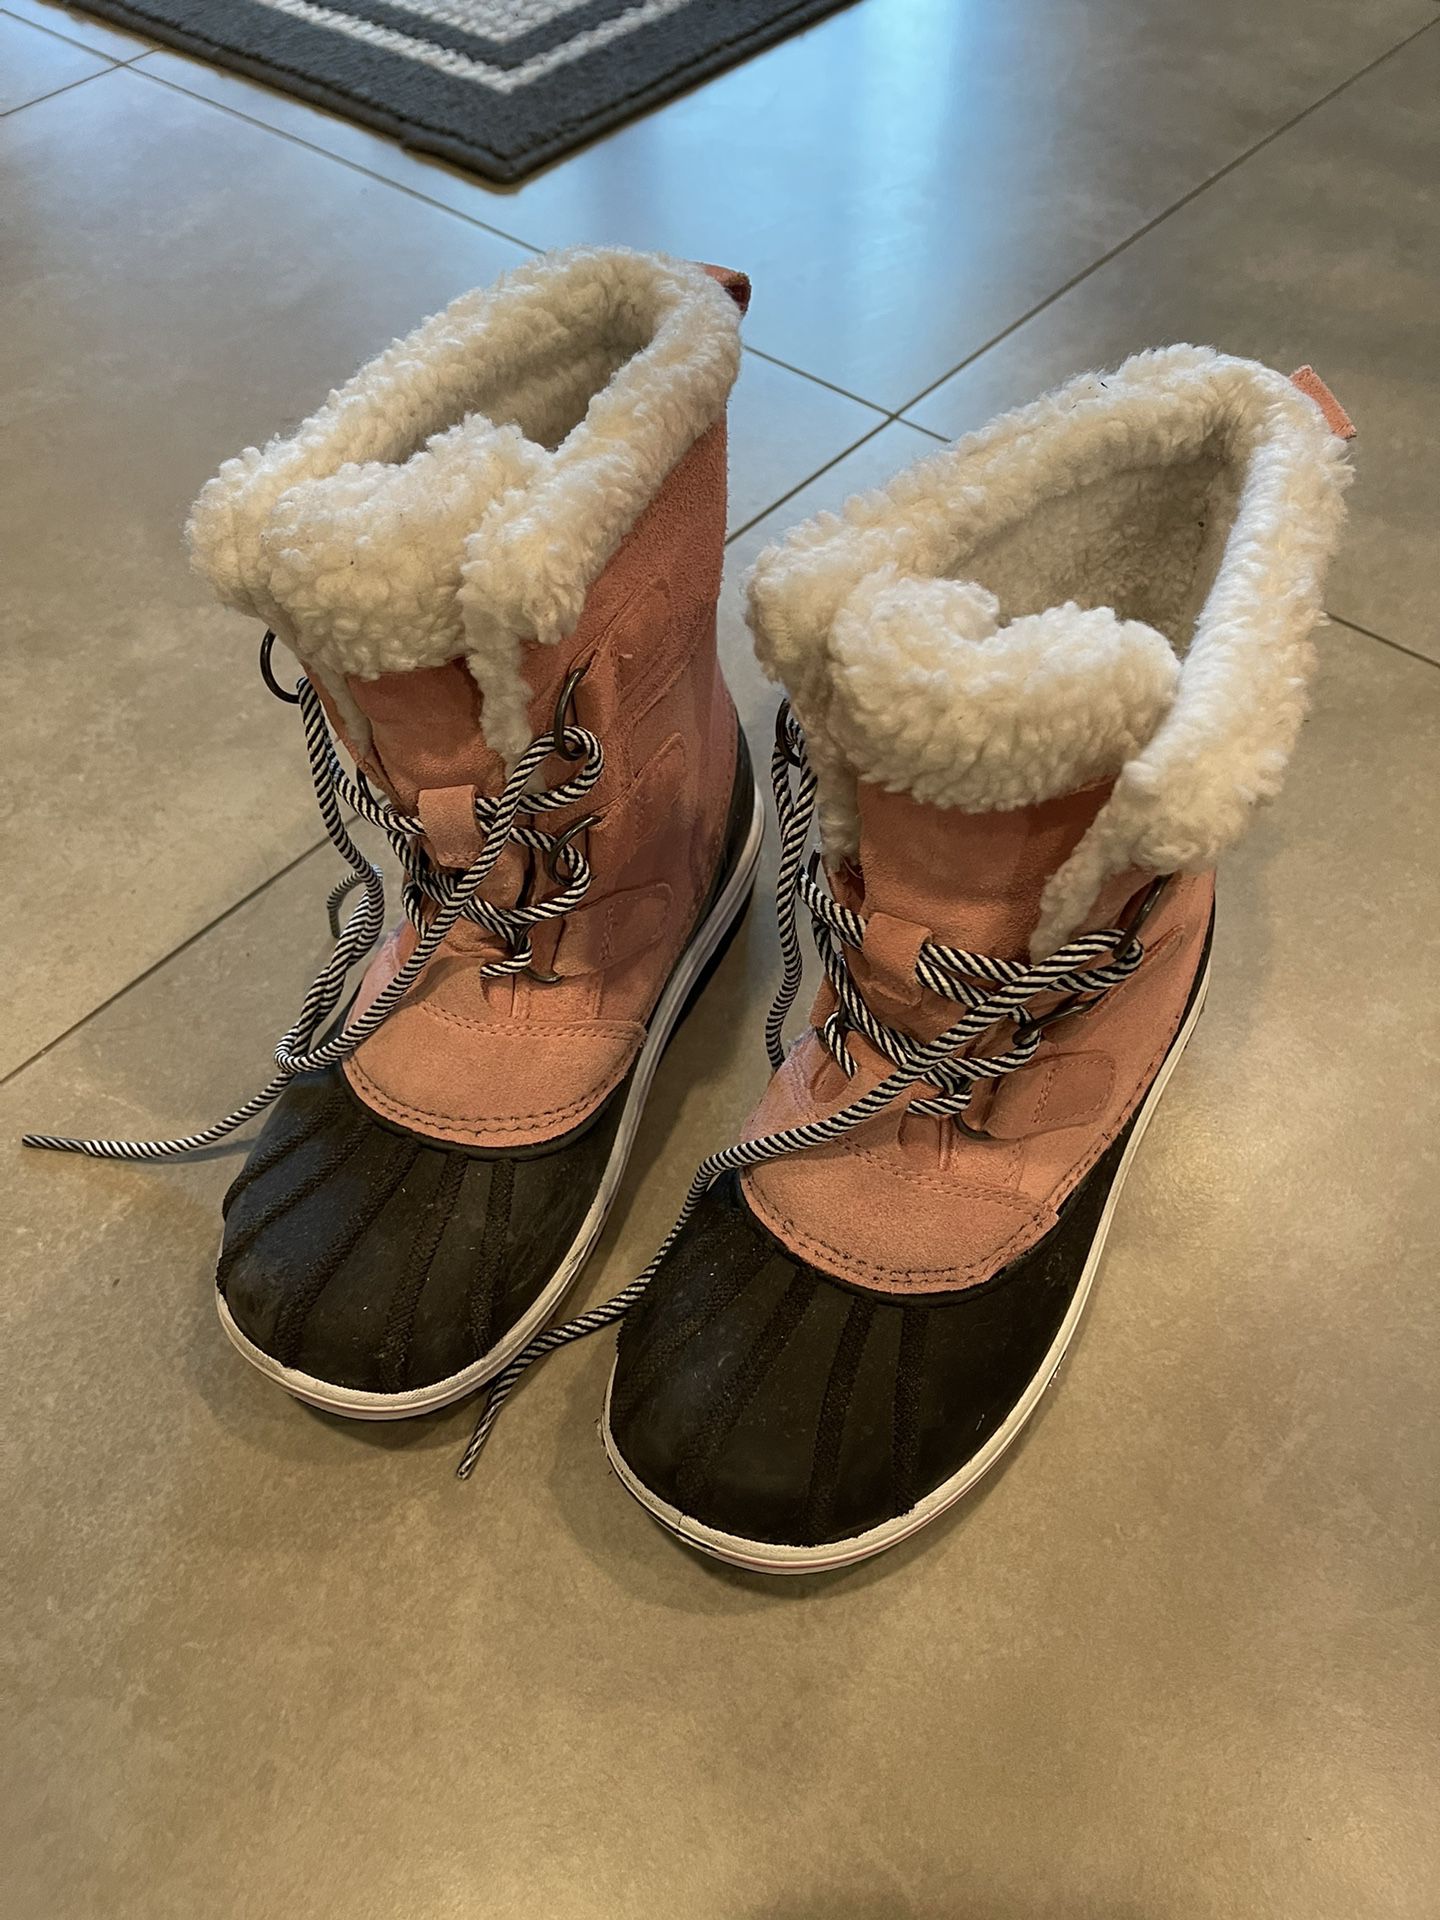 Girls’ Snow boots Size 3